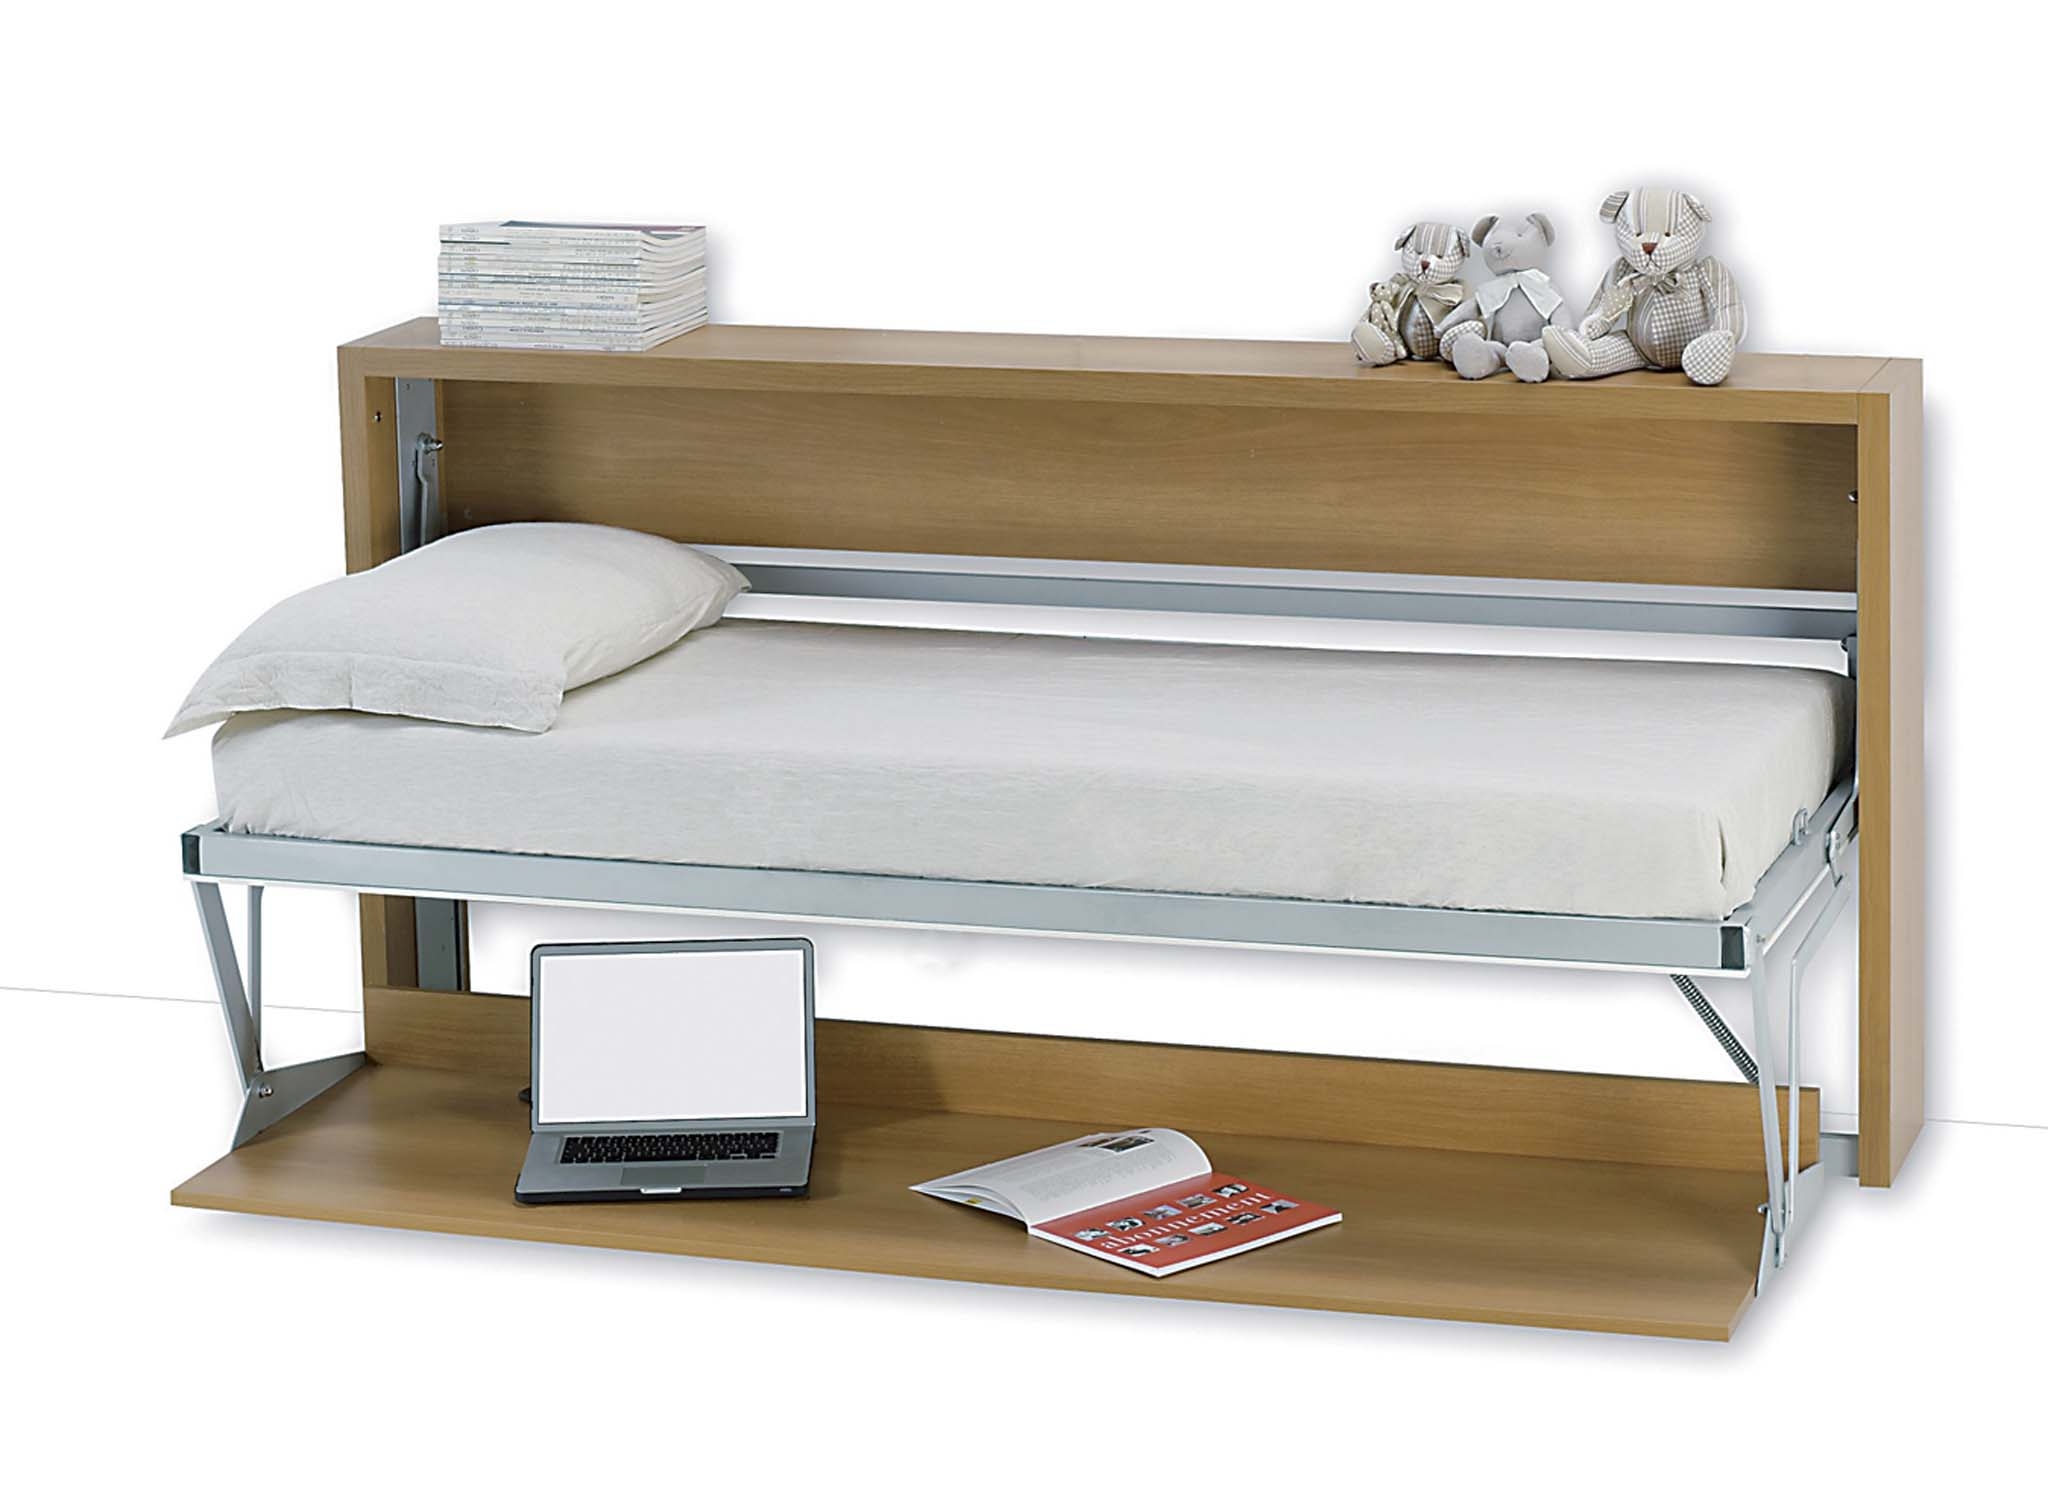 Space Saving Beds Visualhunt, Space Saving Twin Bed Corner Unit